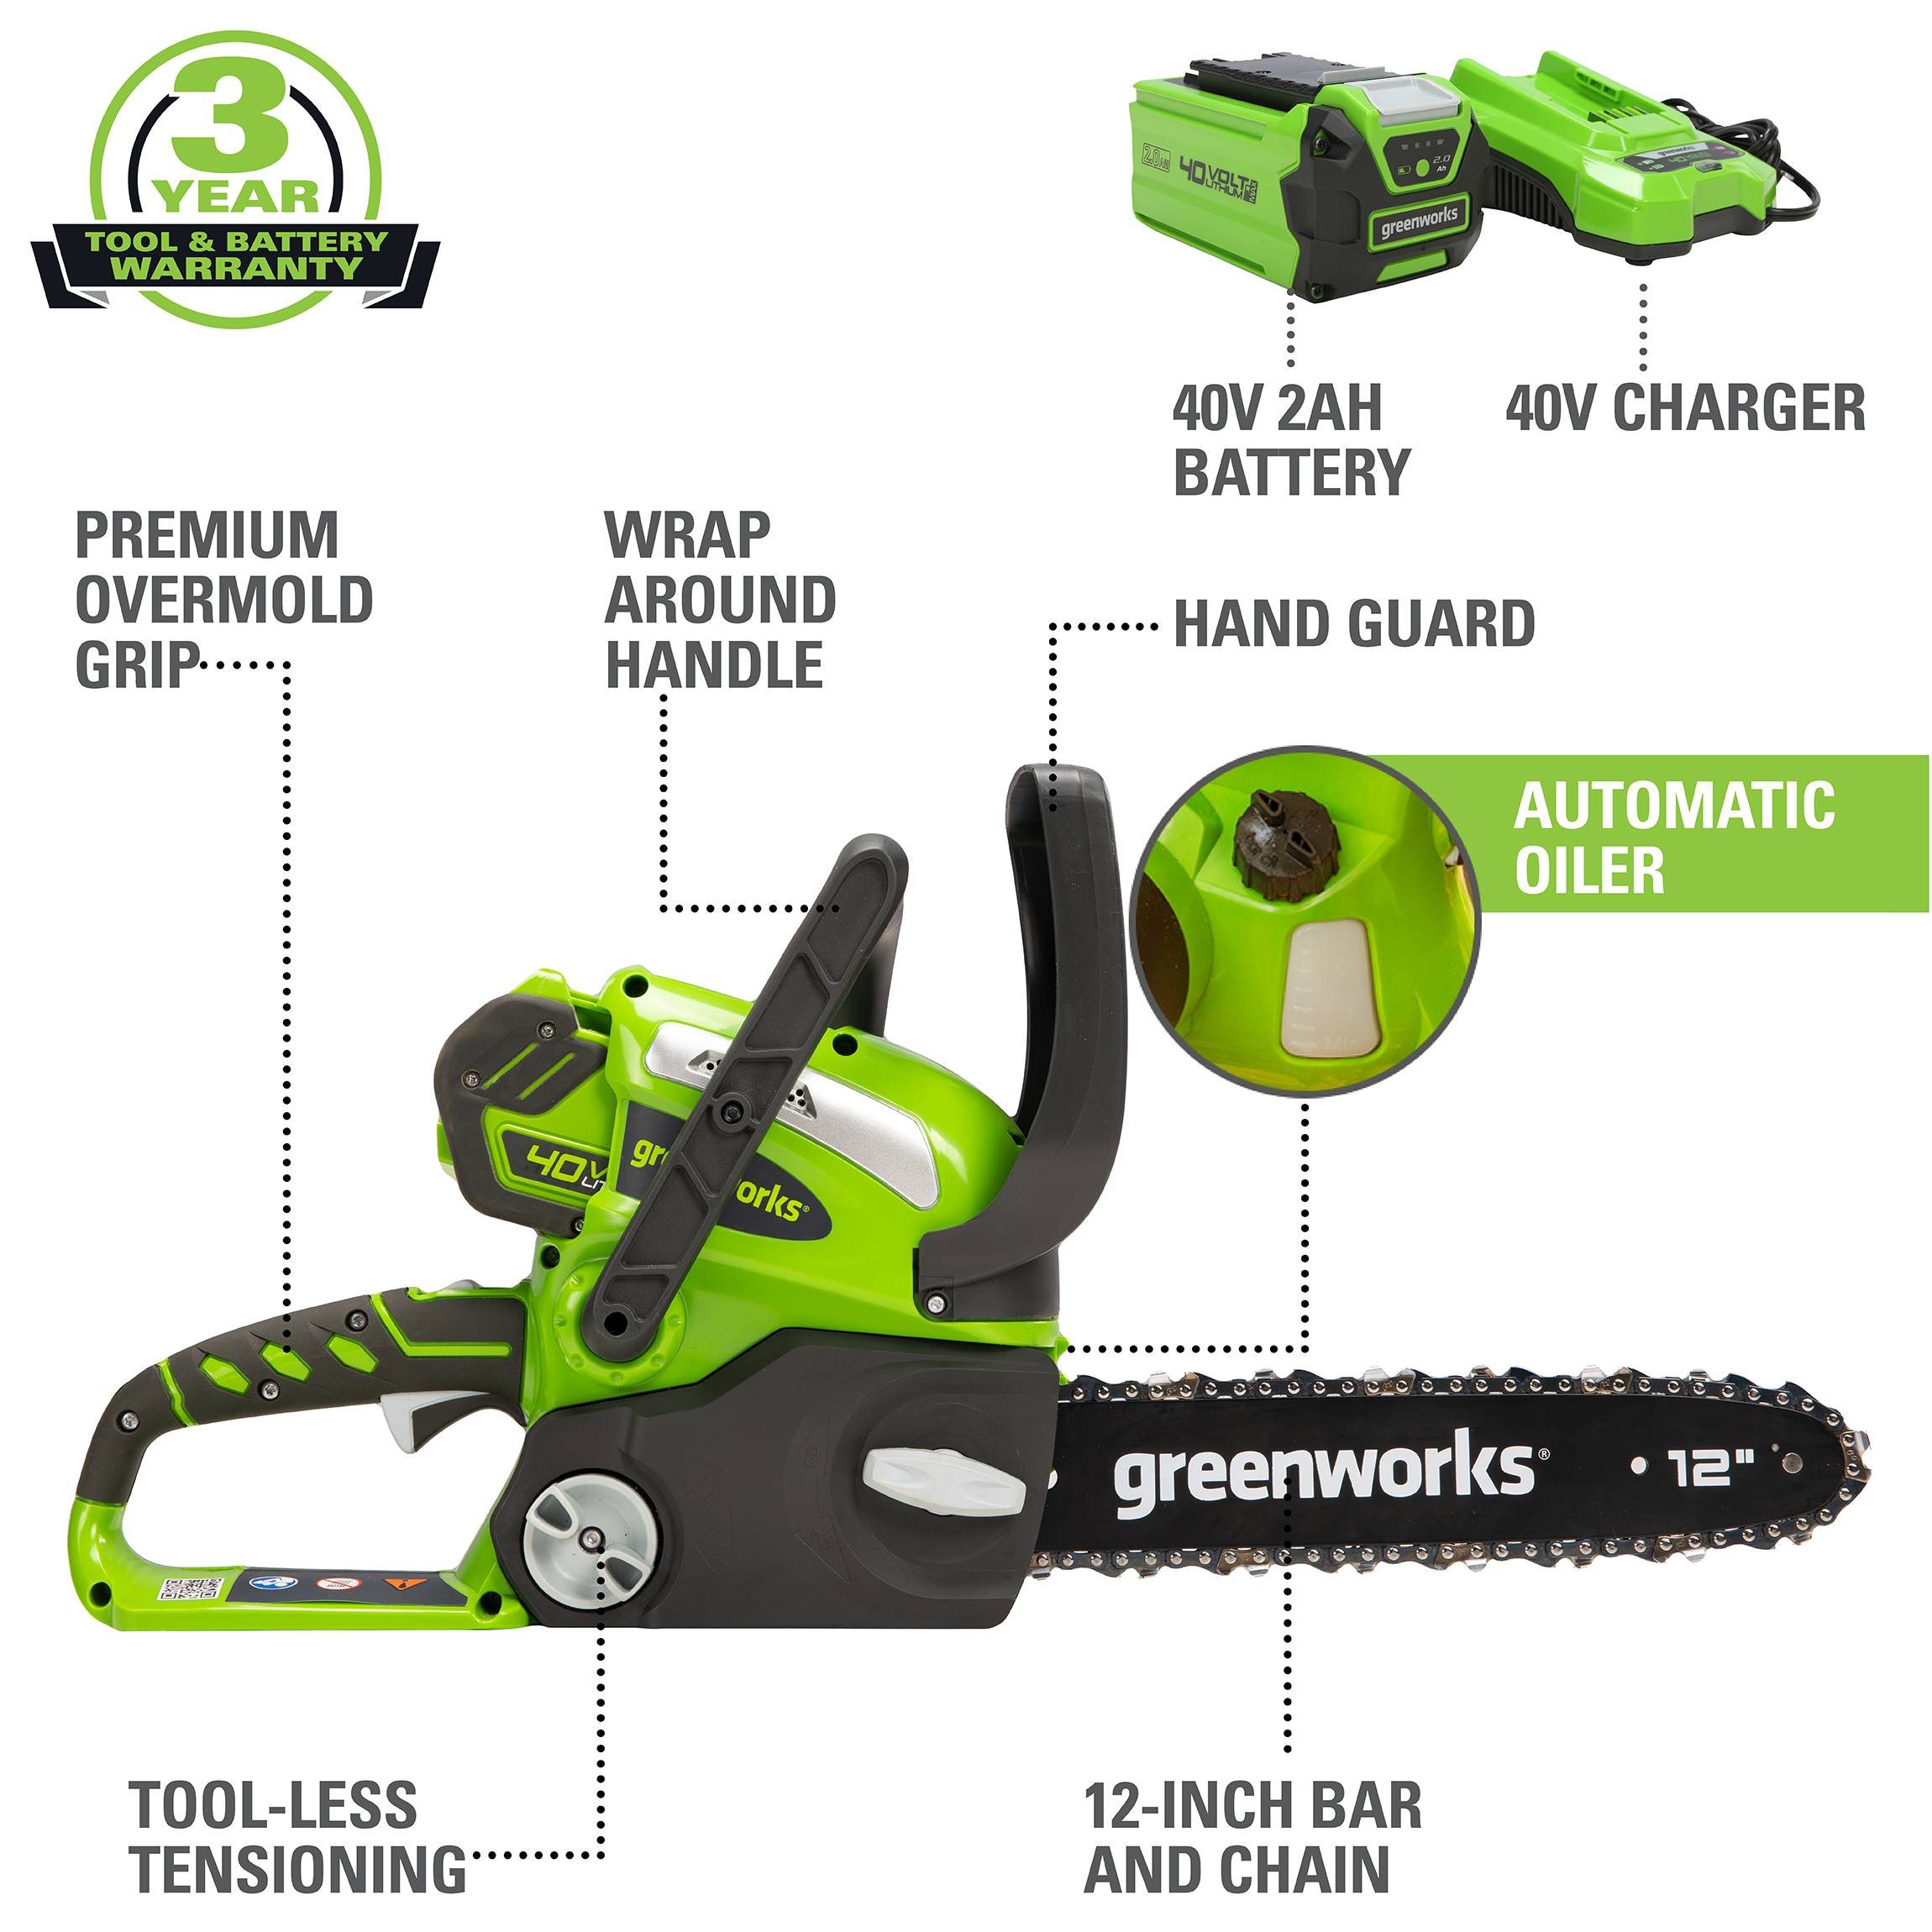 Greenworks 40V 12" Cordless Chainsaw with 2.0 Ah Battery & Charger, 20262 - image 3 of 14